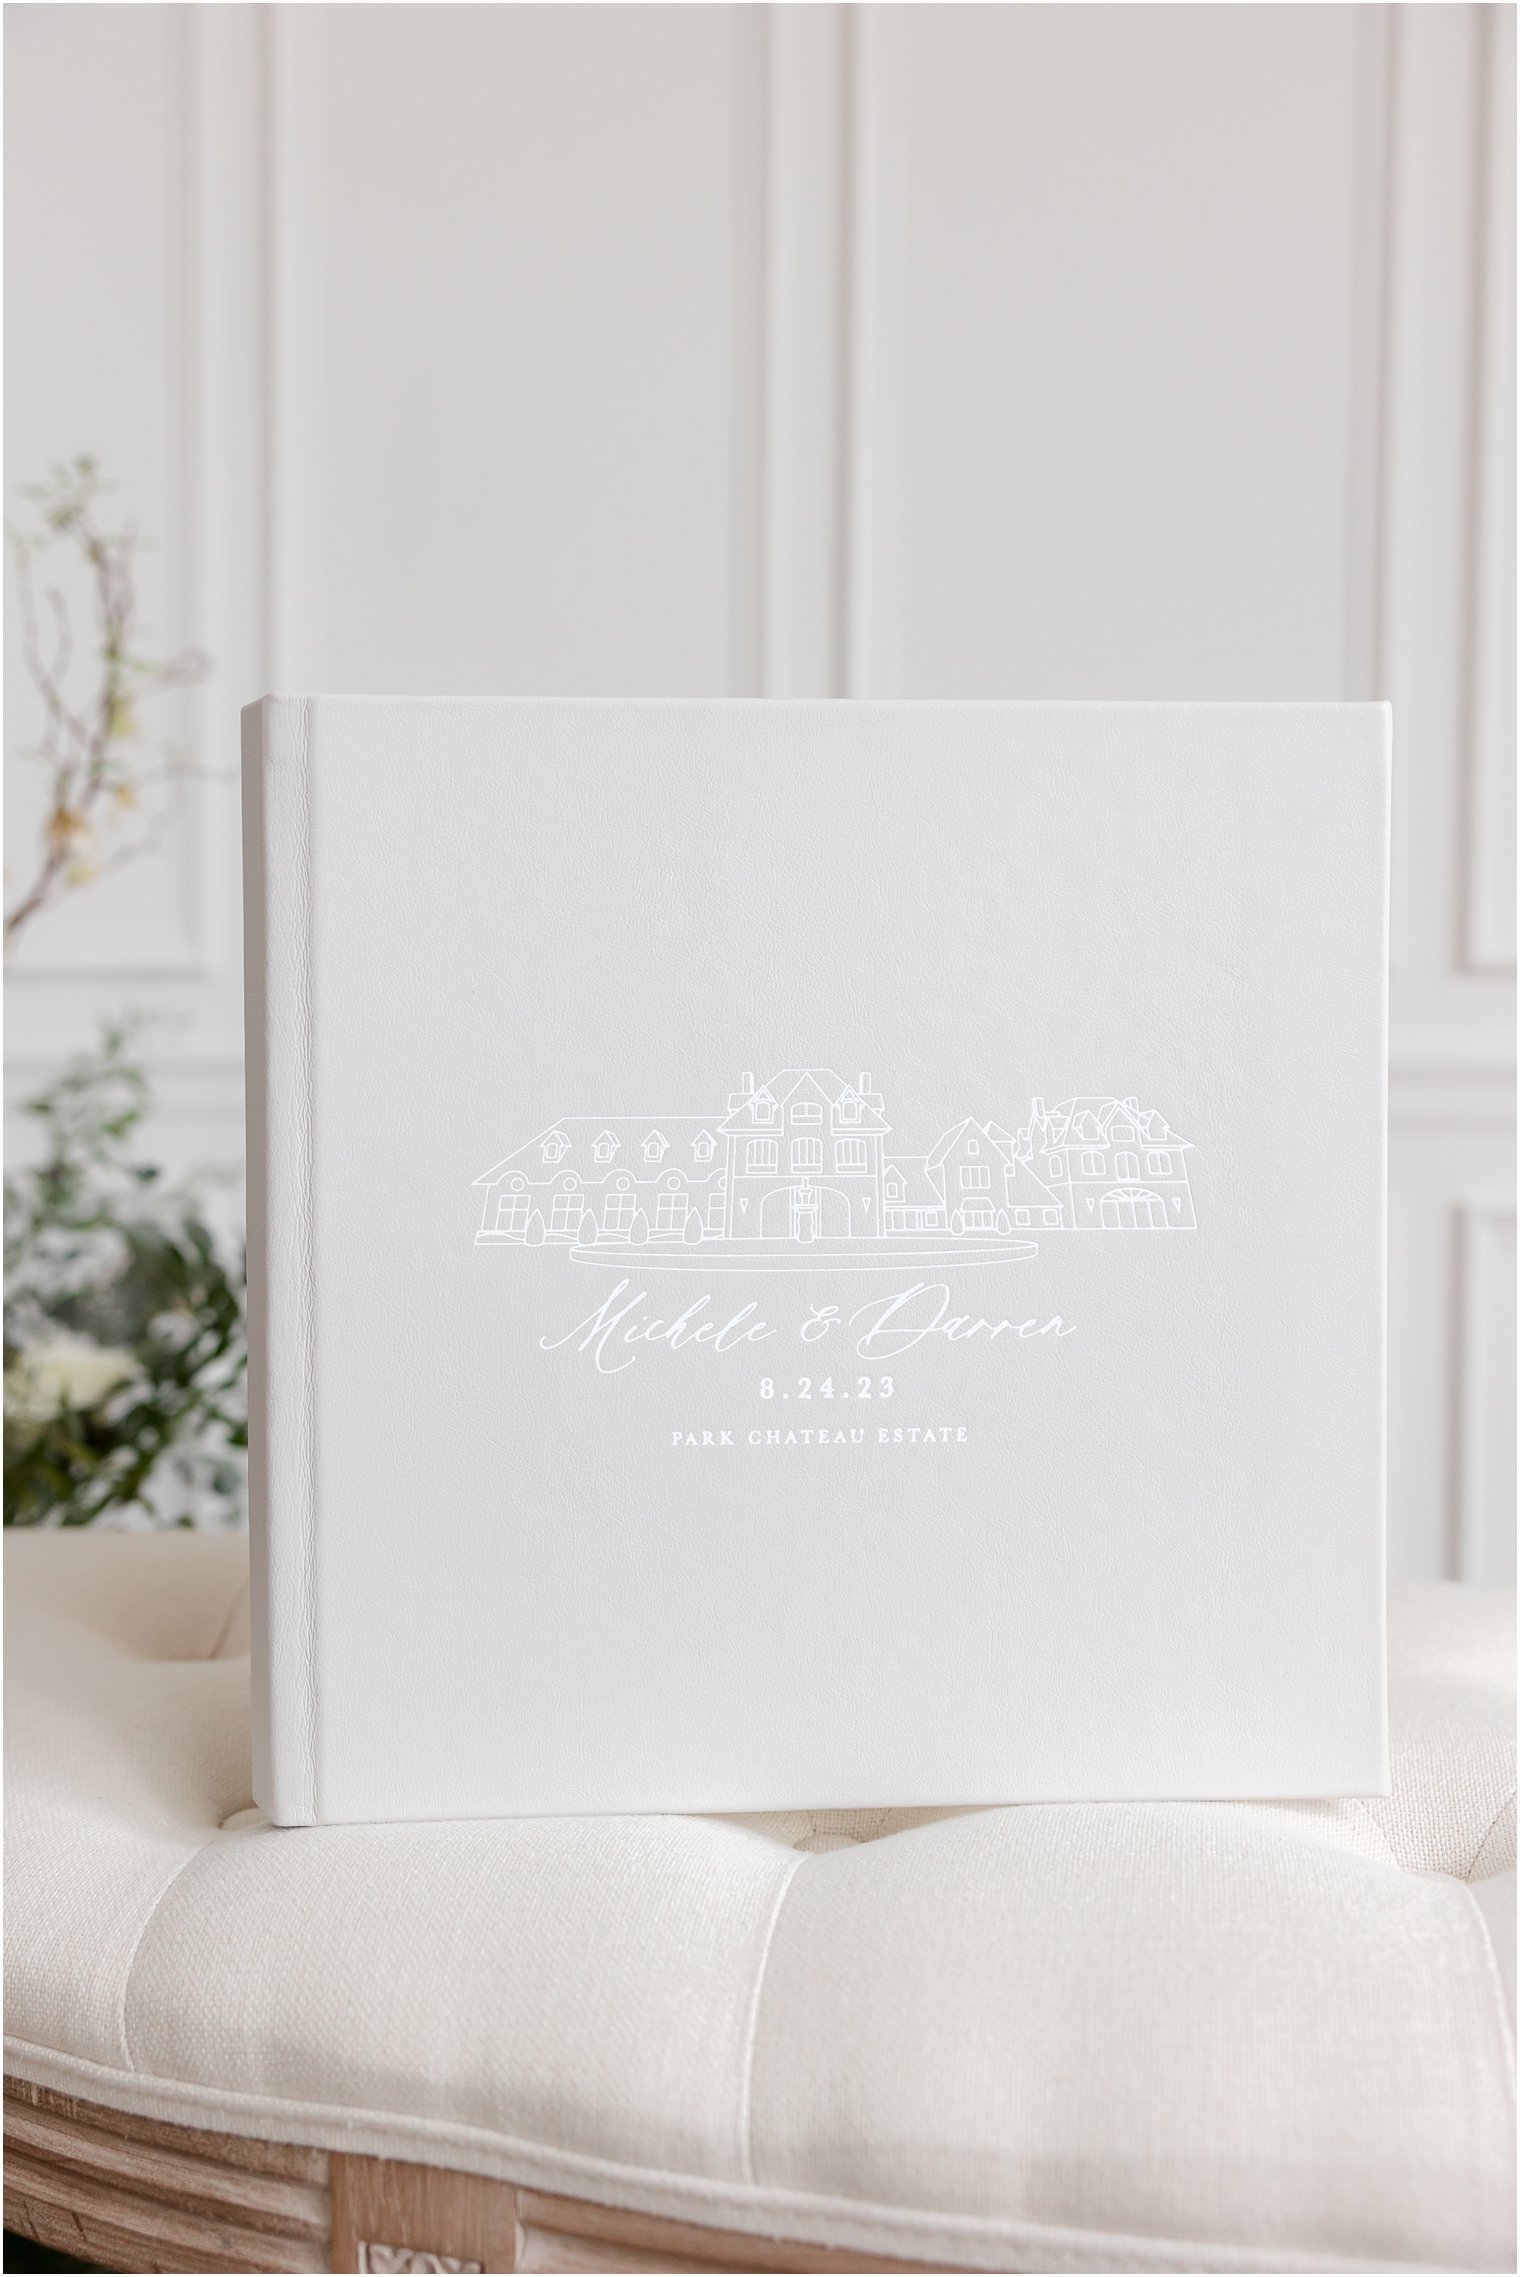 Park Chateau Estate leather album with custom cover